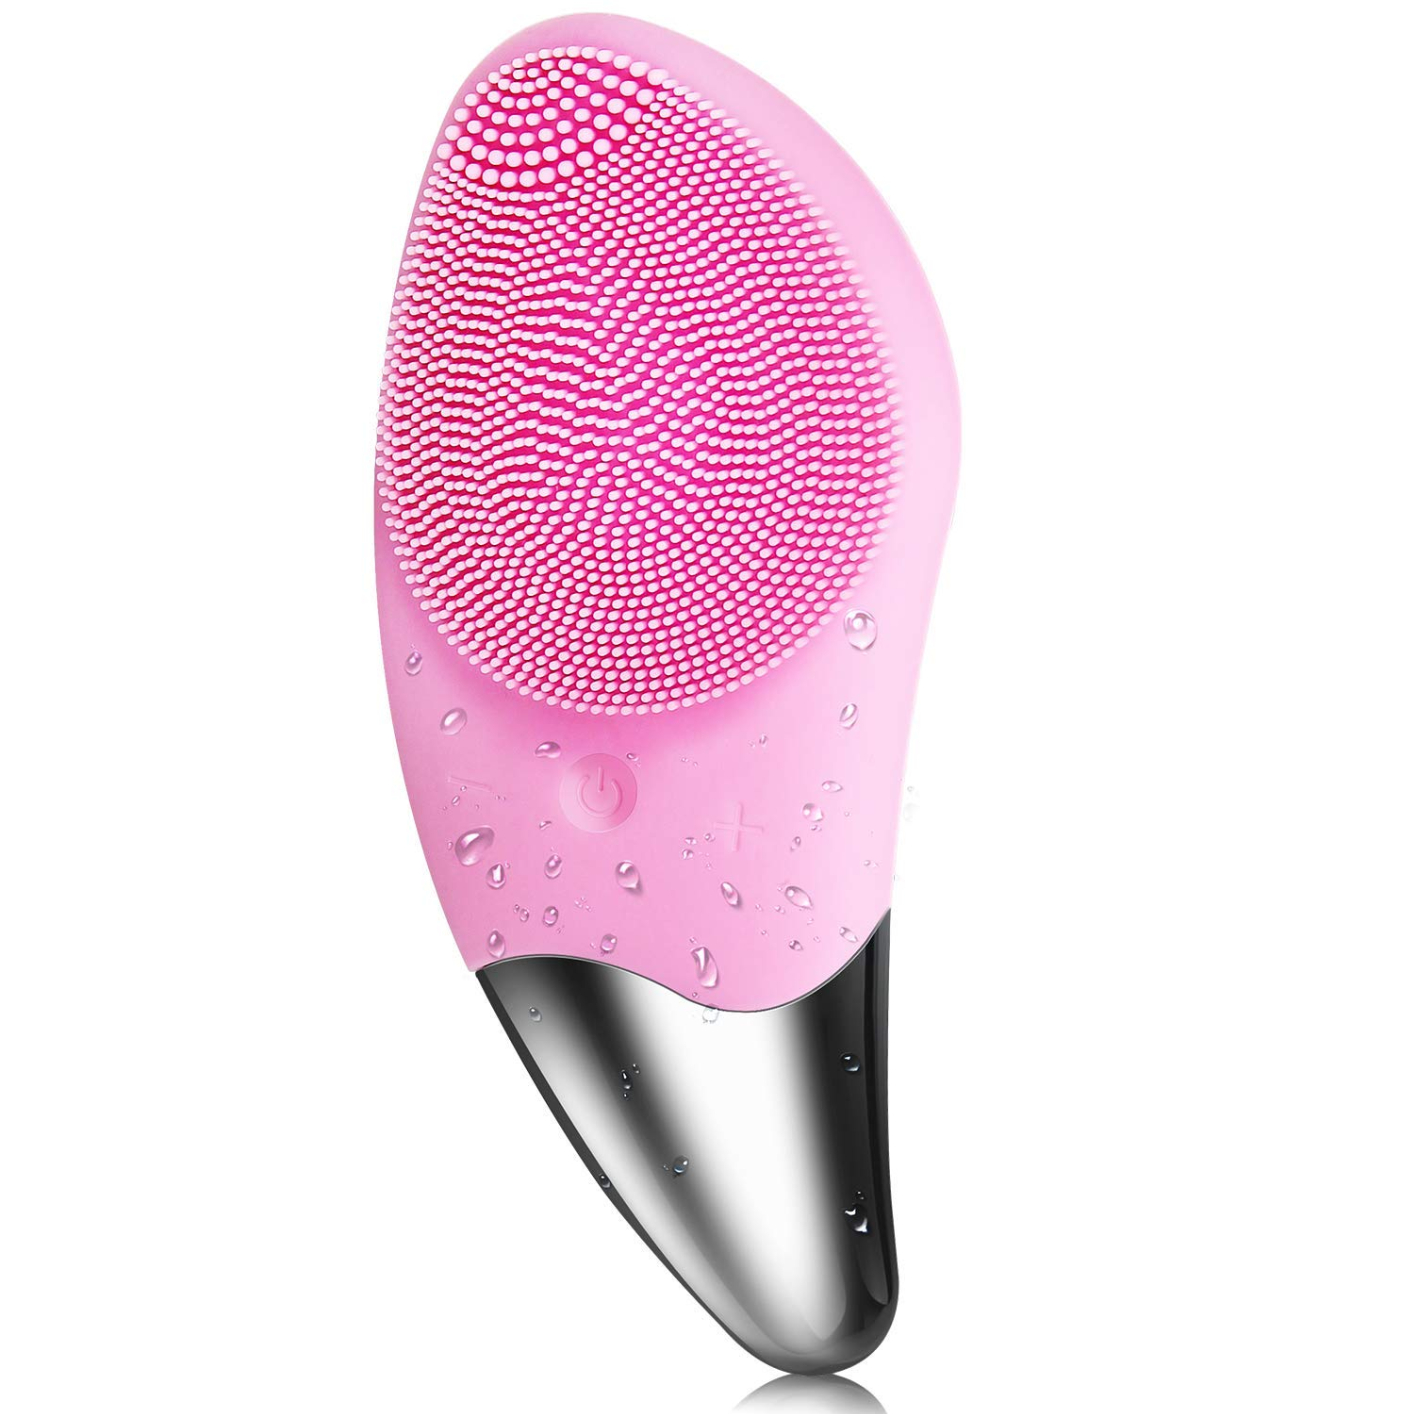 BR1020 Sonic Facial Cleansing Brush, Electric Silicone Face Brush and Massager, Waterproof Silicone Face Scrubber for Deep Cleansing, Exfoliating, Blackhead Removing, Rechargeable,for Girls Gifts